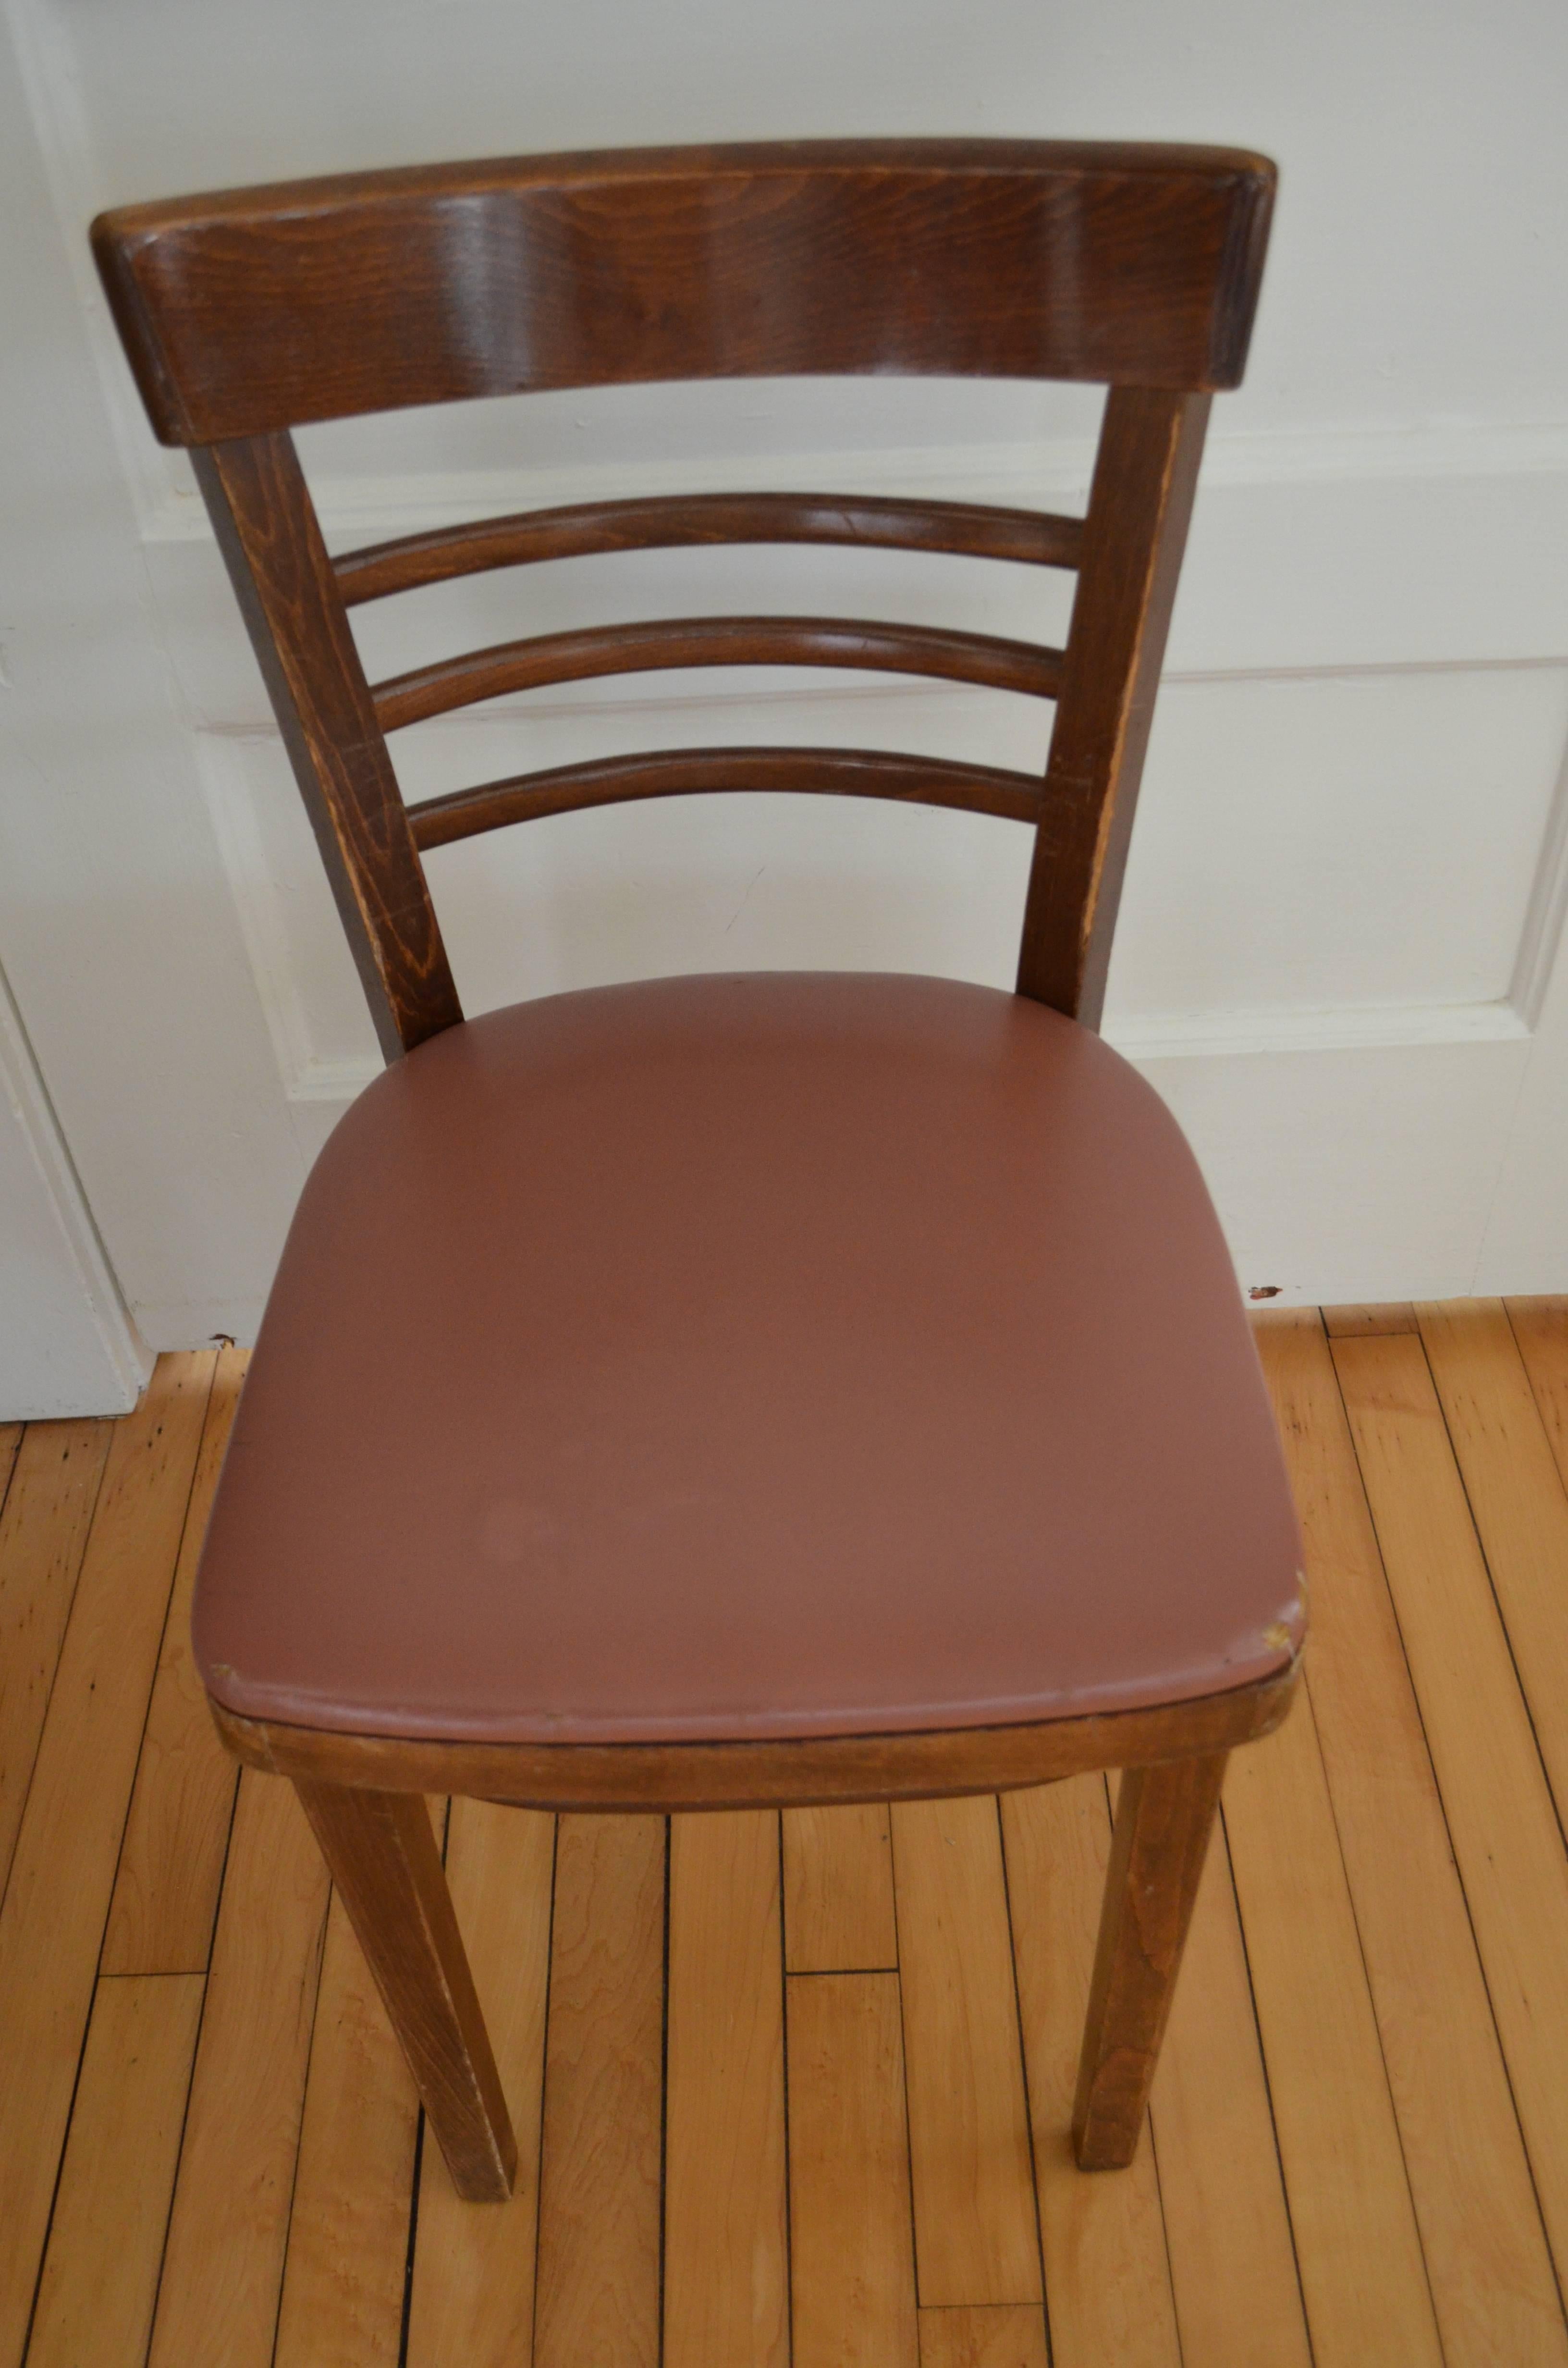 Thonet midcentury cafe and restaurant chairs. Priced as a set of eight. Total of 22 are available. Small footprint with sturdy, wooden ladder frame. Seats are currently upholstered in naugahyde but can be easily and inexpensively reupholstered as